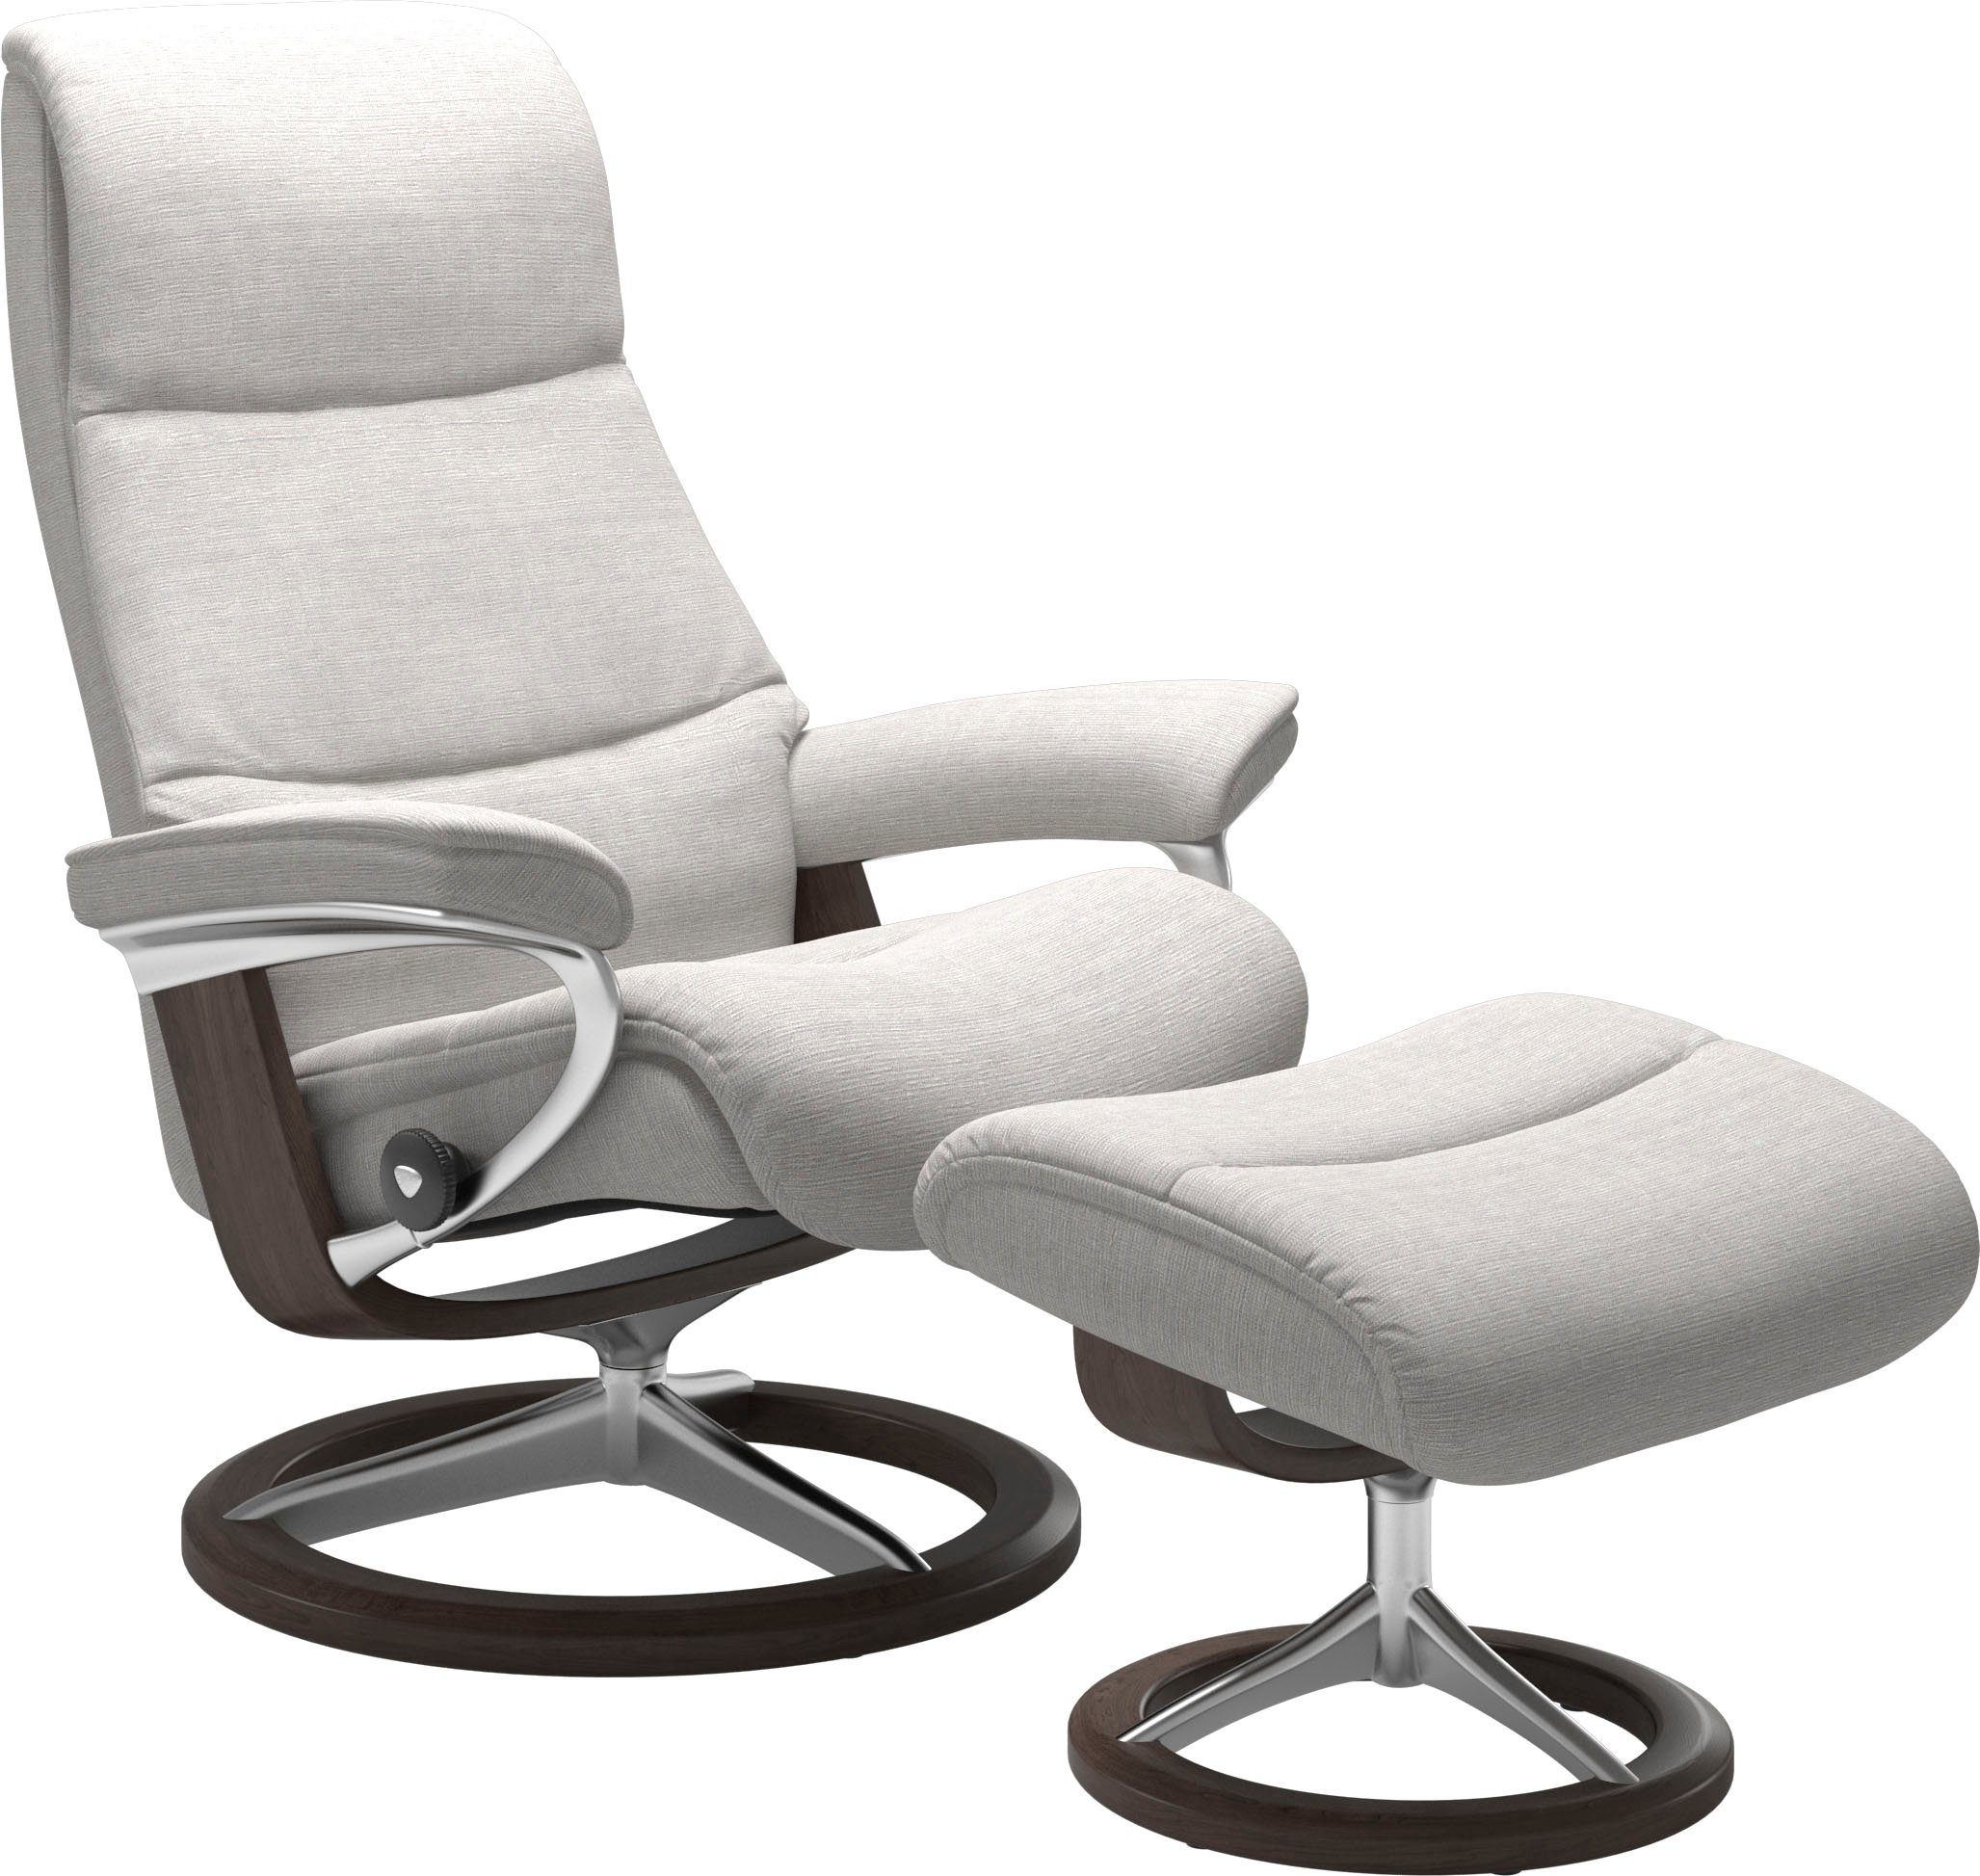 L,Gestell View, Signature Größe Relaxsessel Wenge mit Base, Stressless®